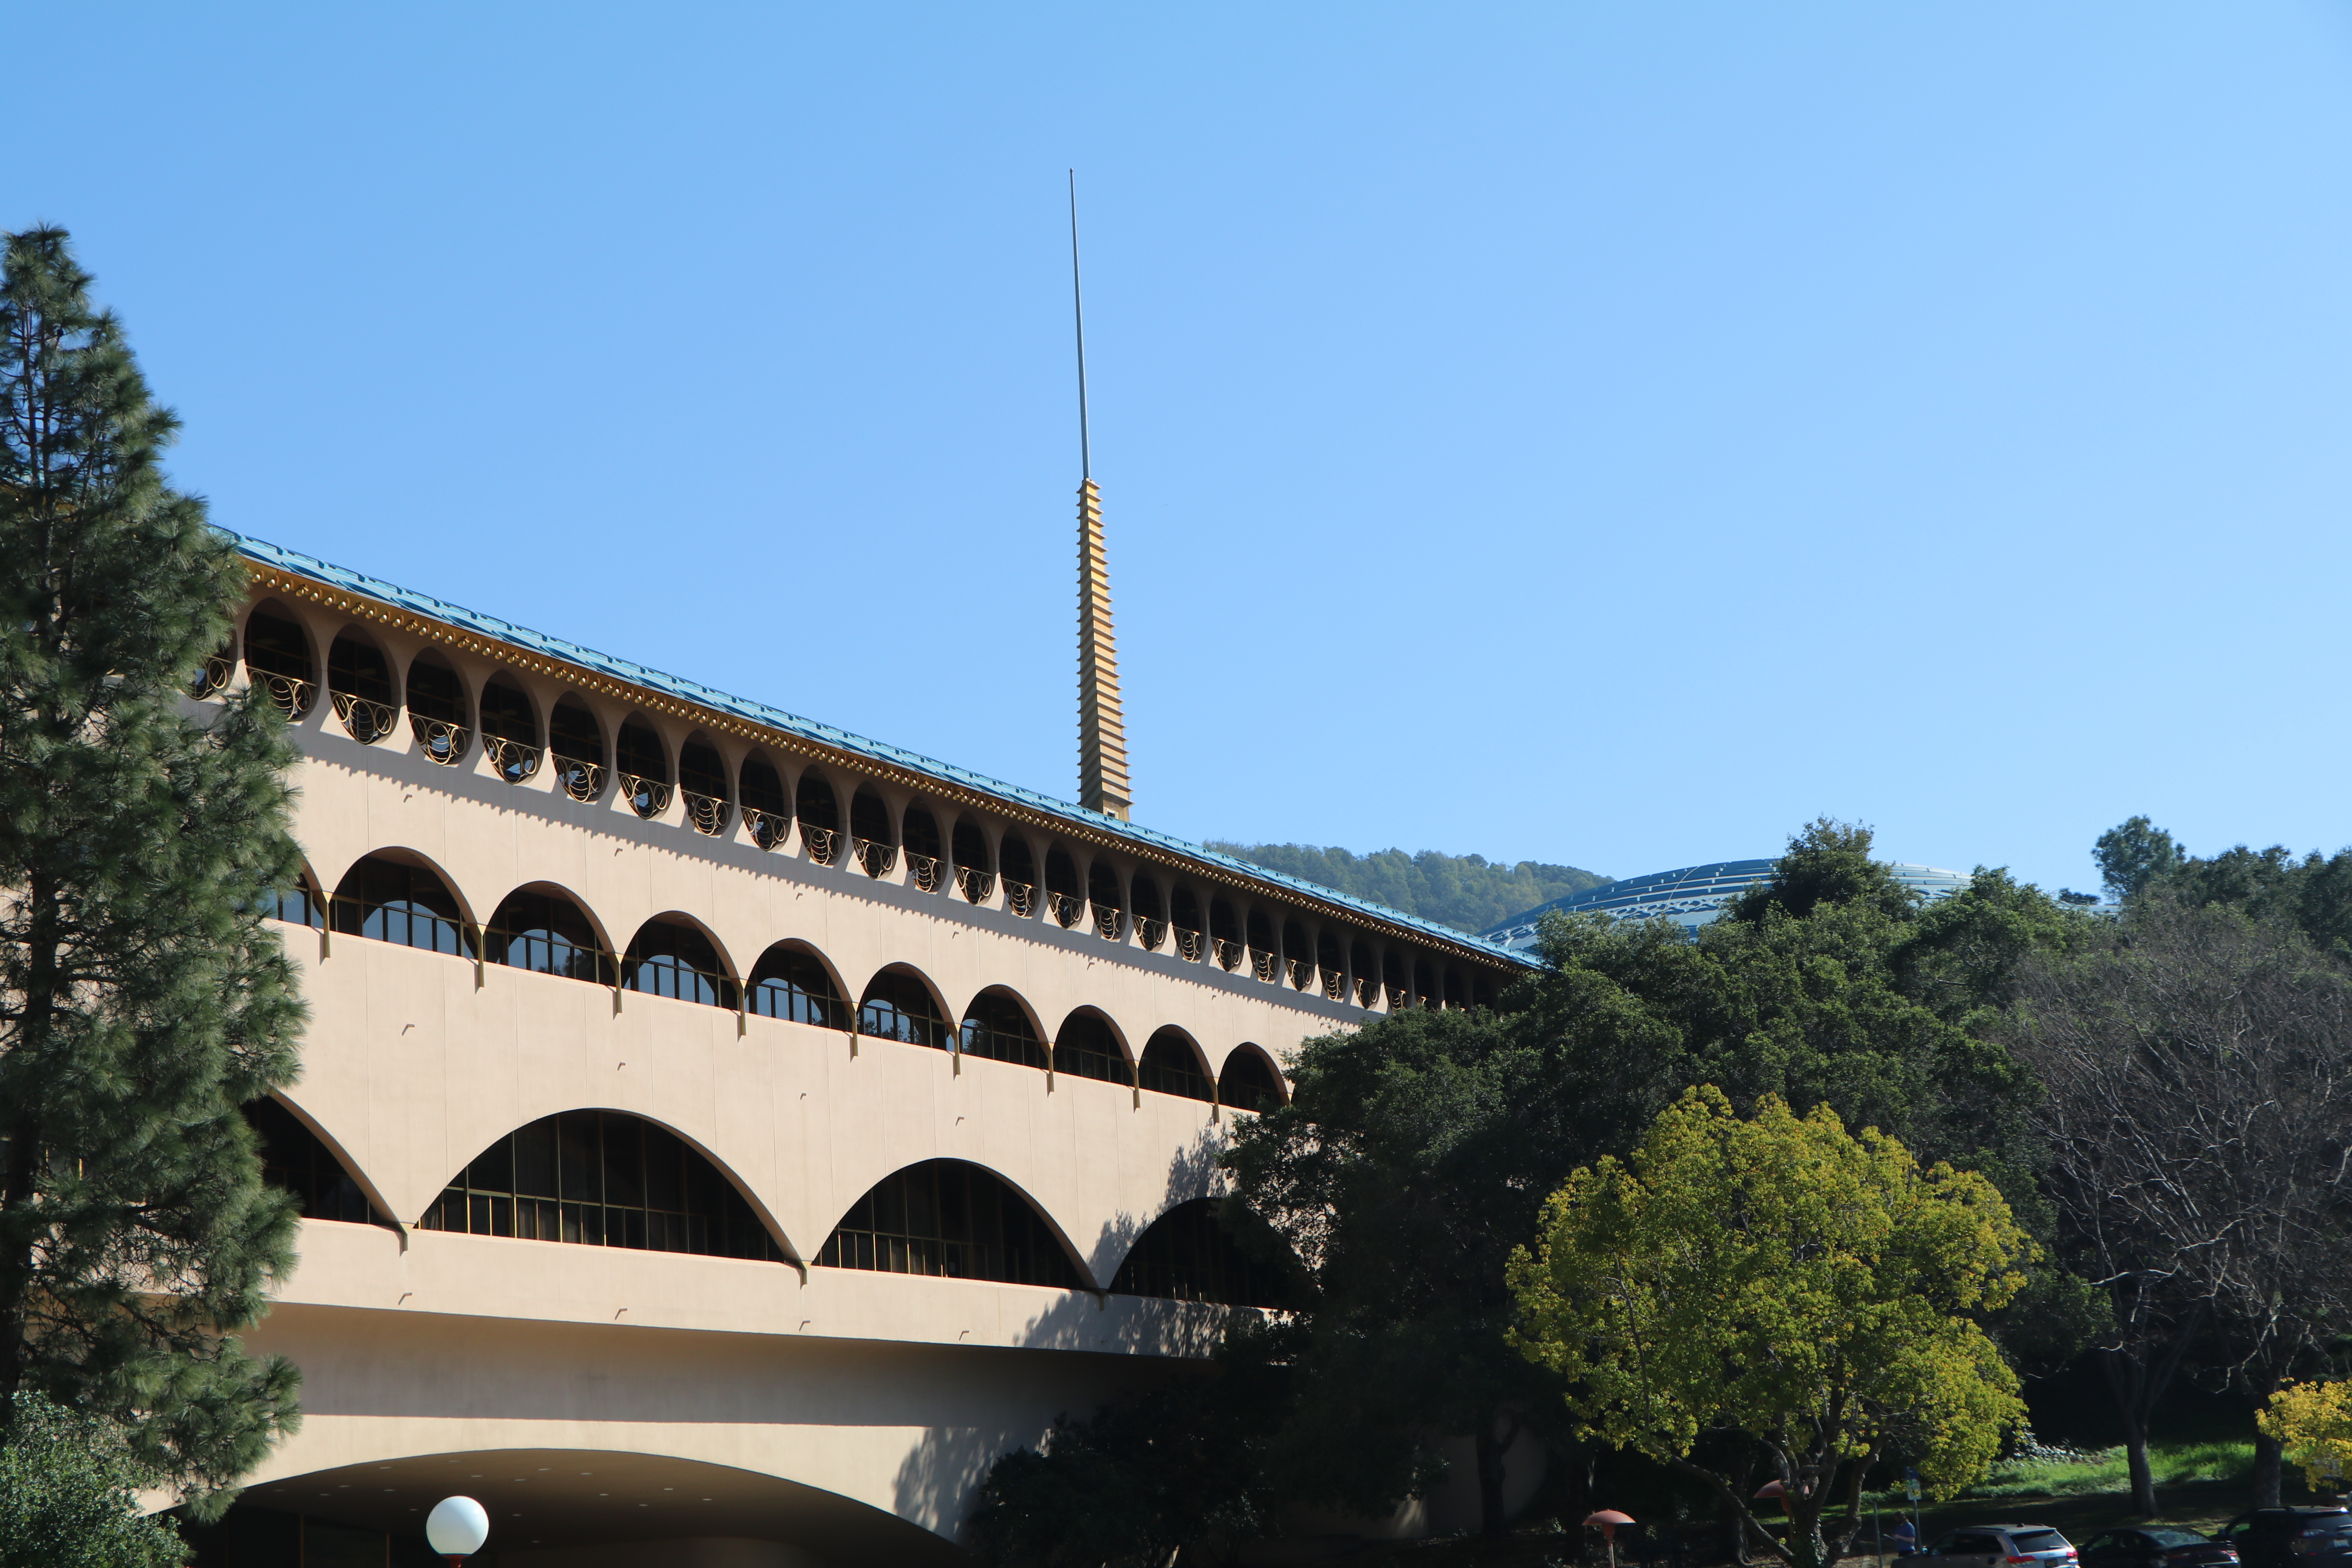 An exterior view of the Marin County Civic Center showing the spire.